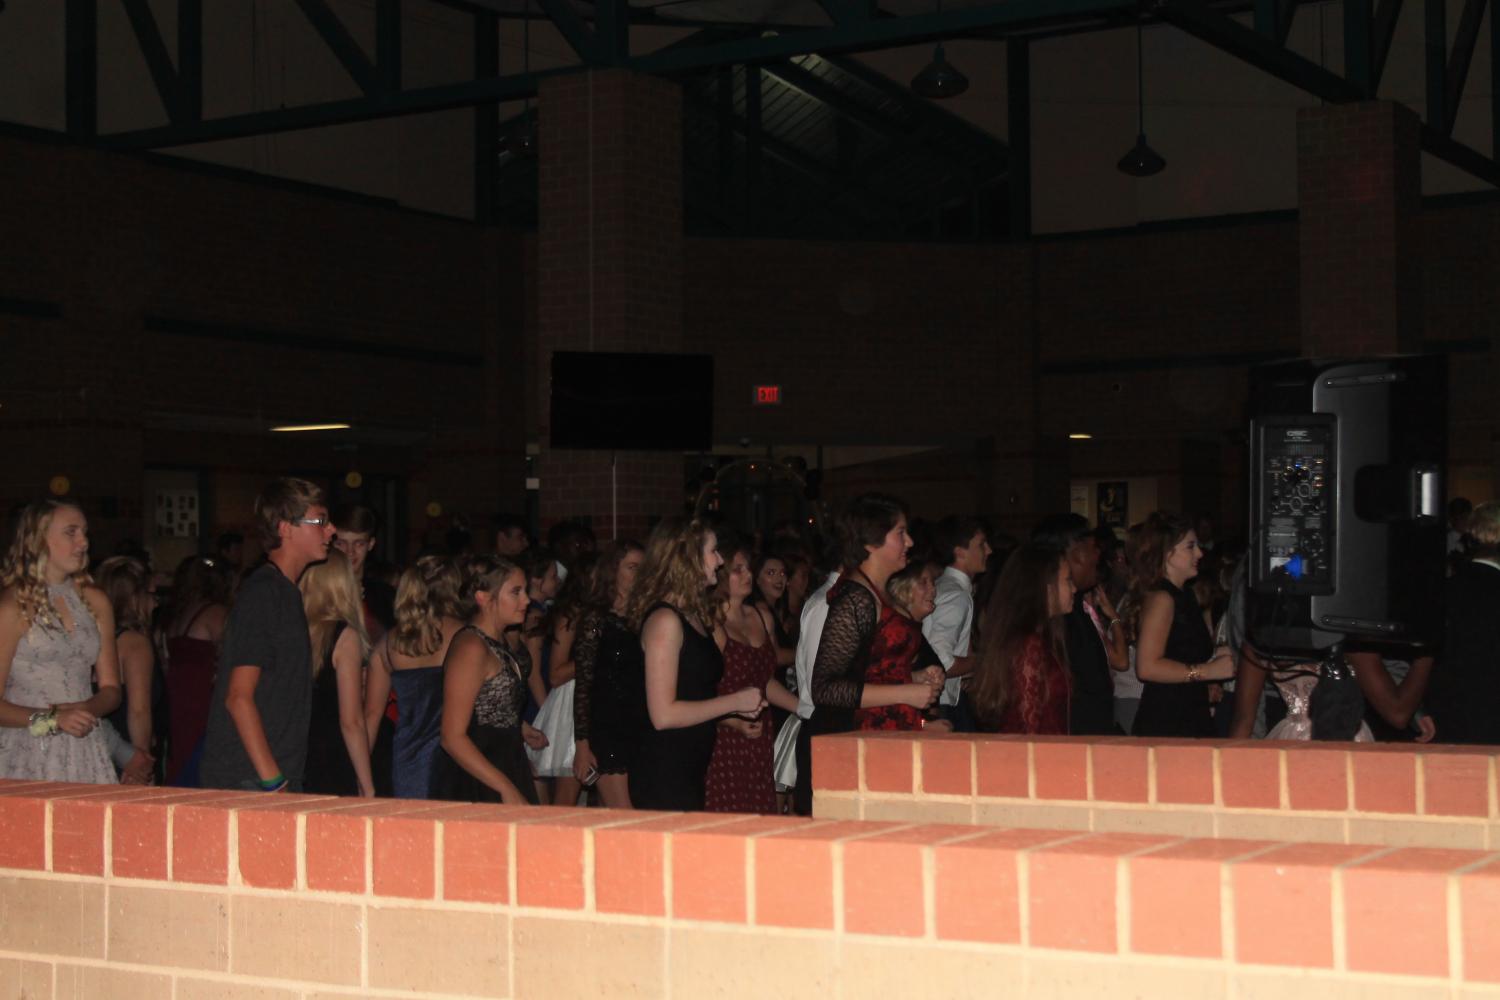 Homecoming+Dance+at+DHS+%28Photos+by+Kaitlyn+Flanders%29